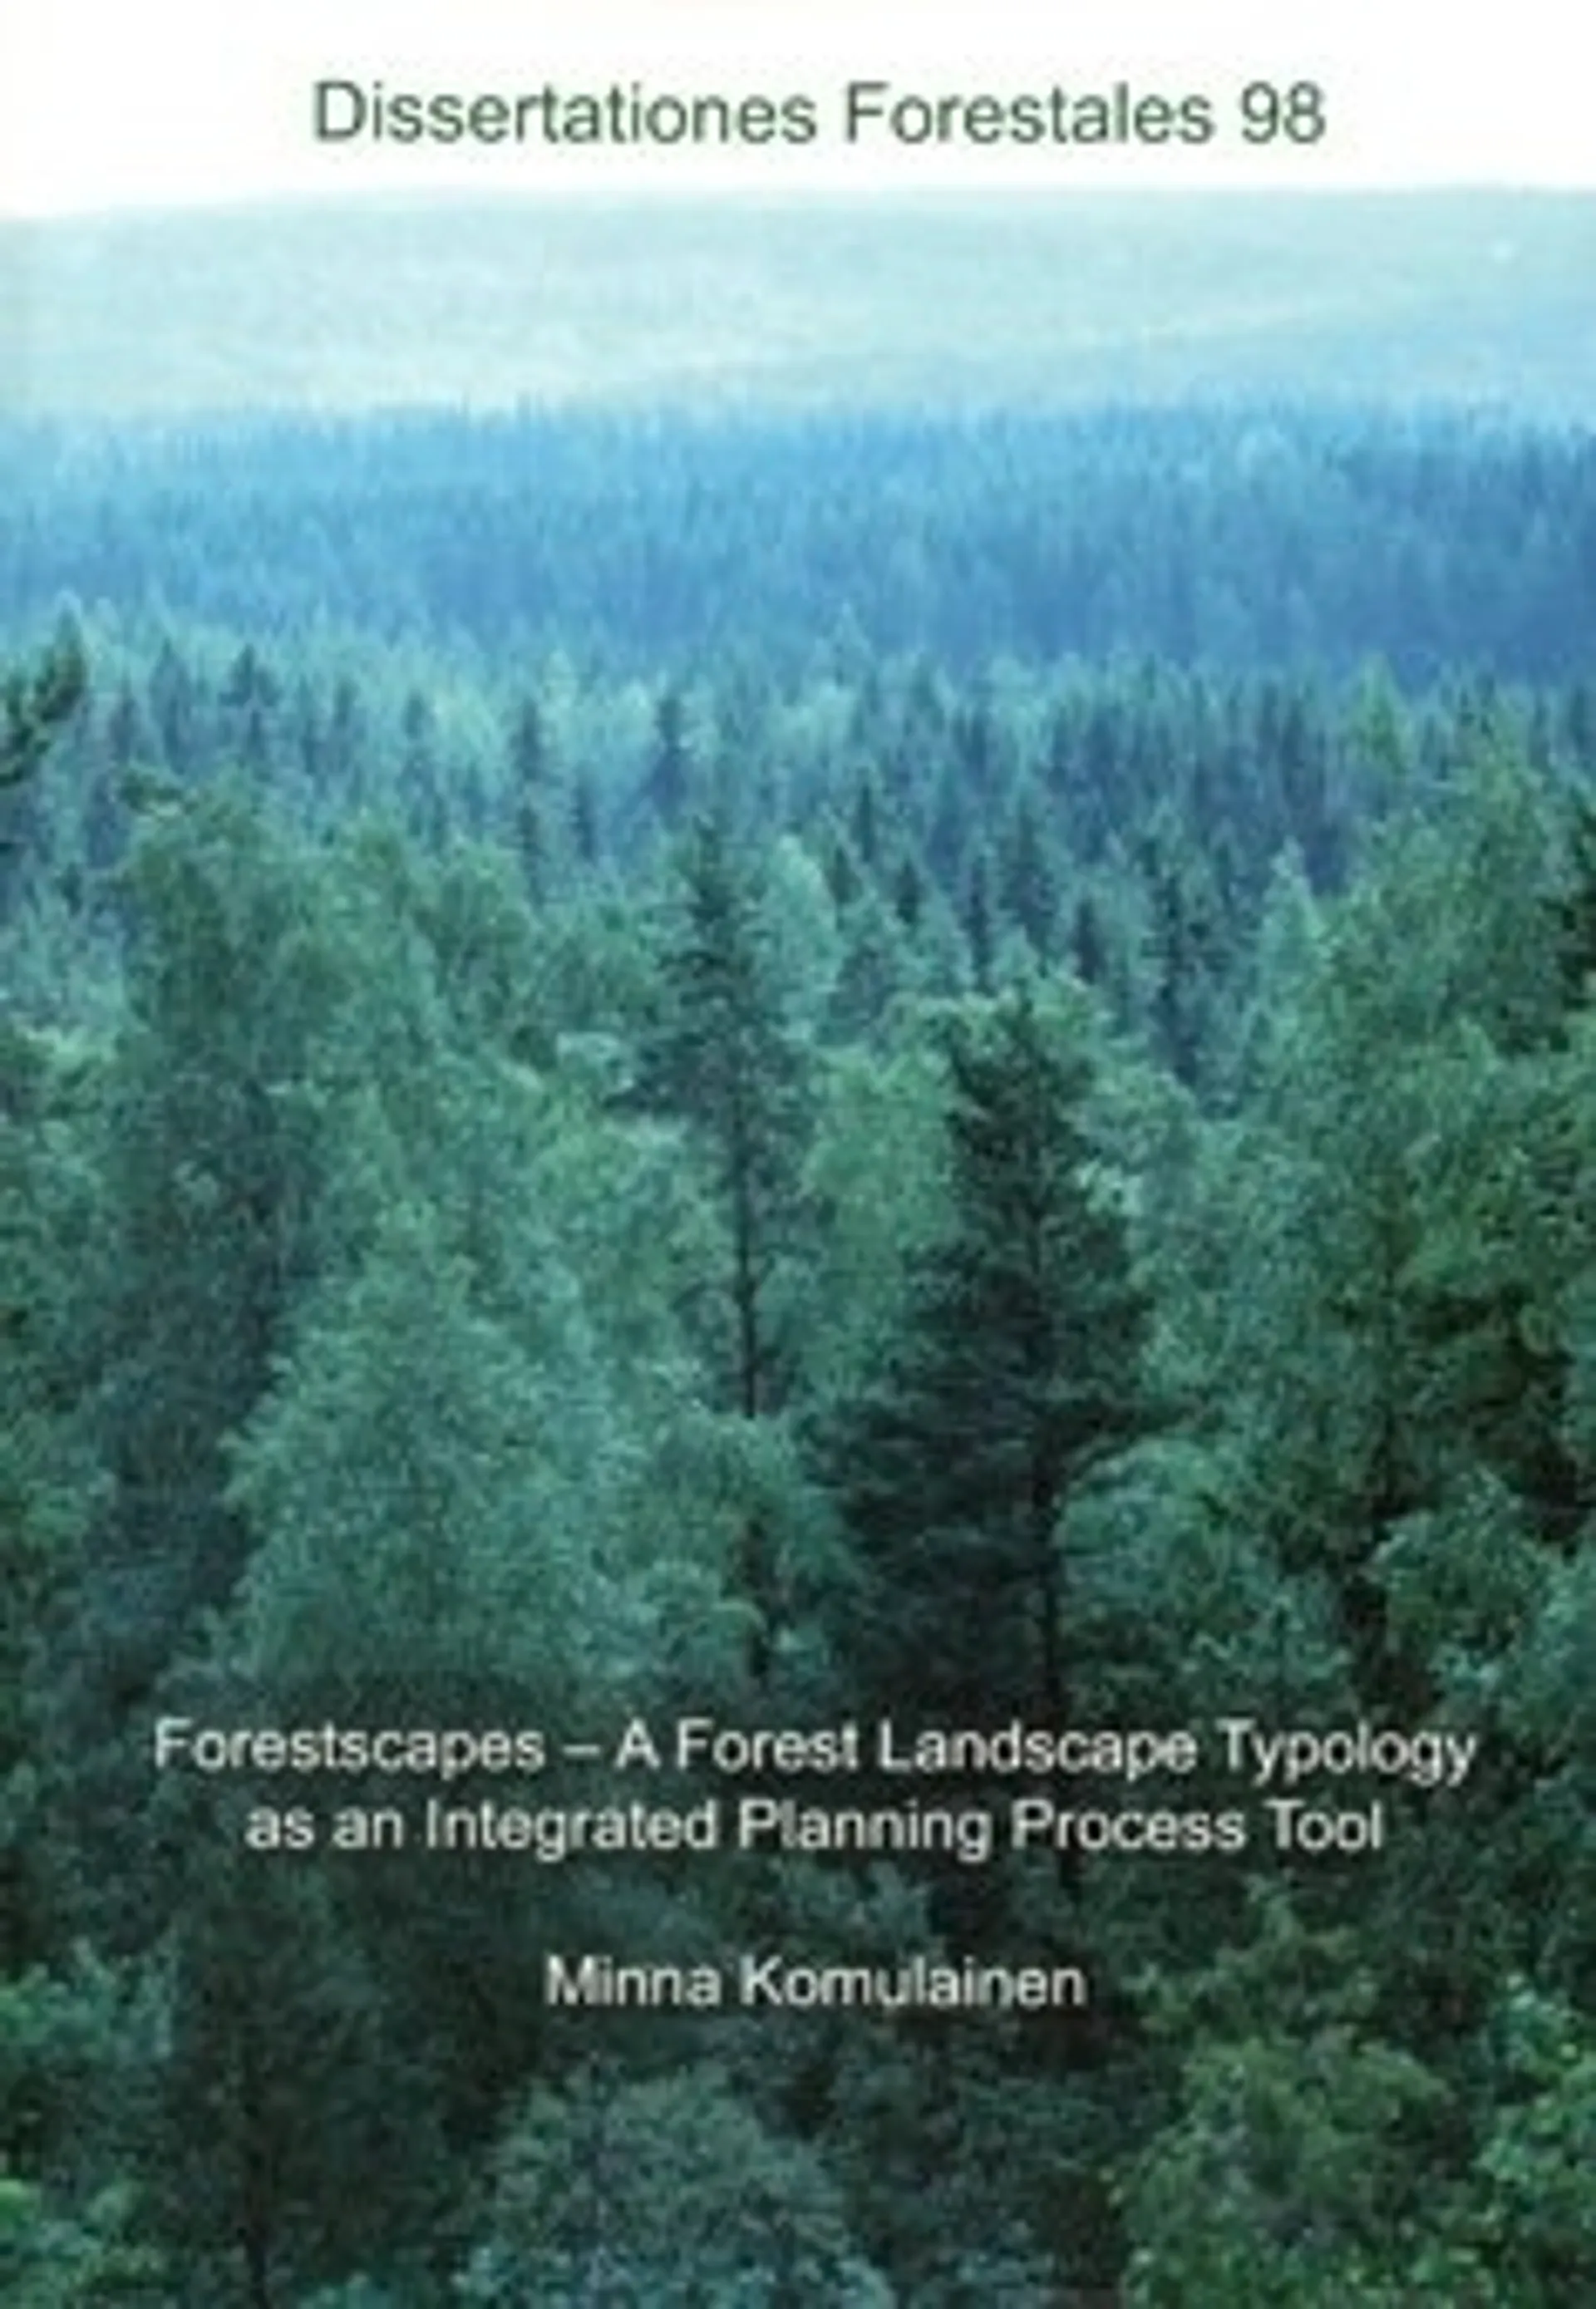 Forestscapes - a foret landscape typology as an integrated planning process tool